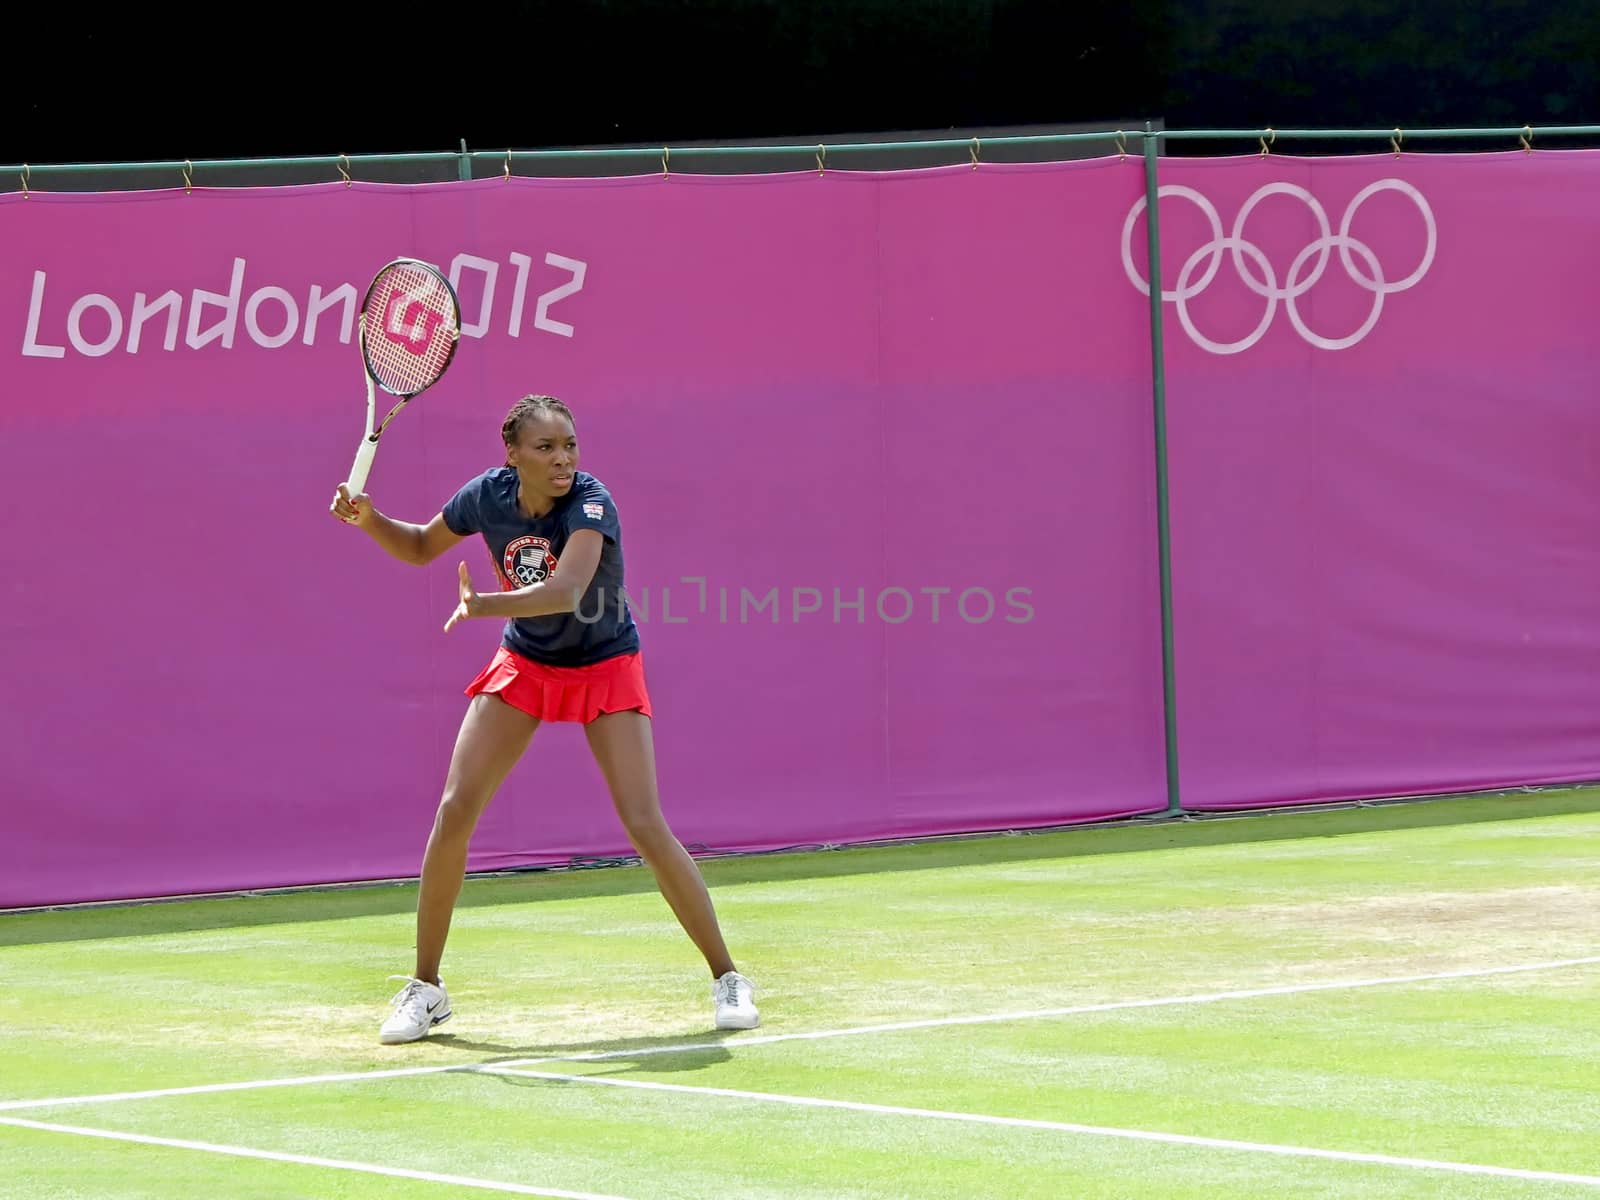 WIMBLEDON, ENGLAND - August 2nd, 2012 - Venus Williams on the practice court at the Summer Olympics in London in 2012.